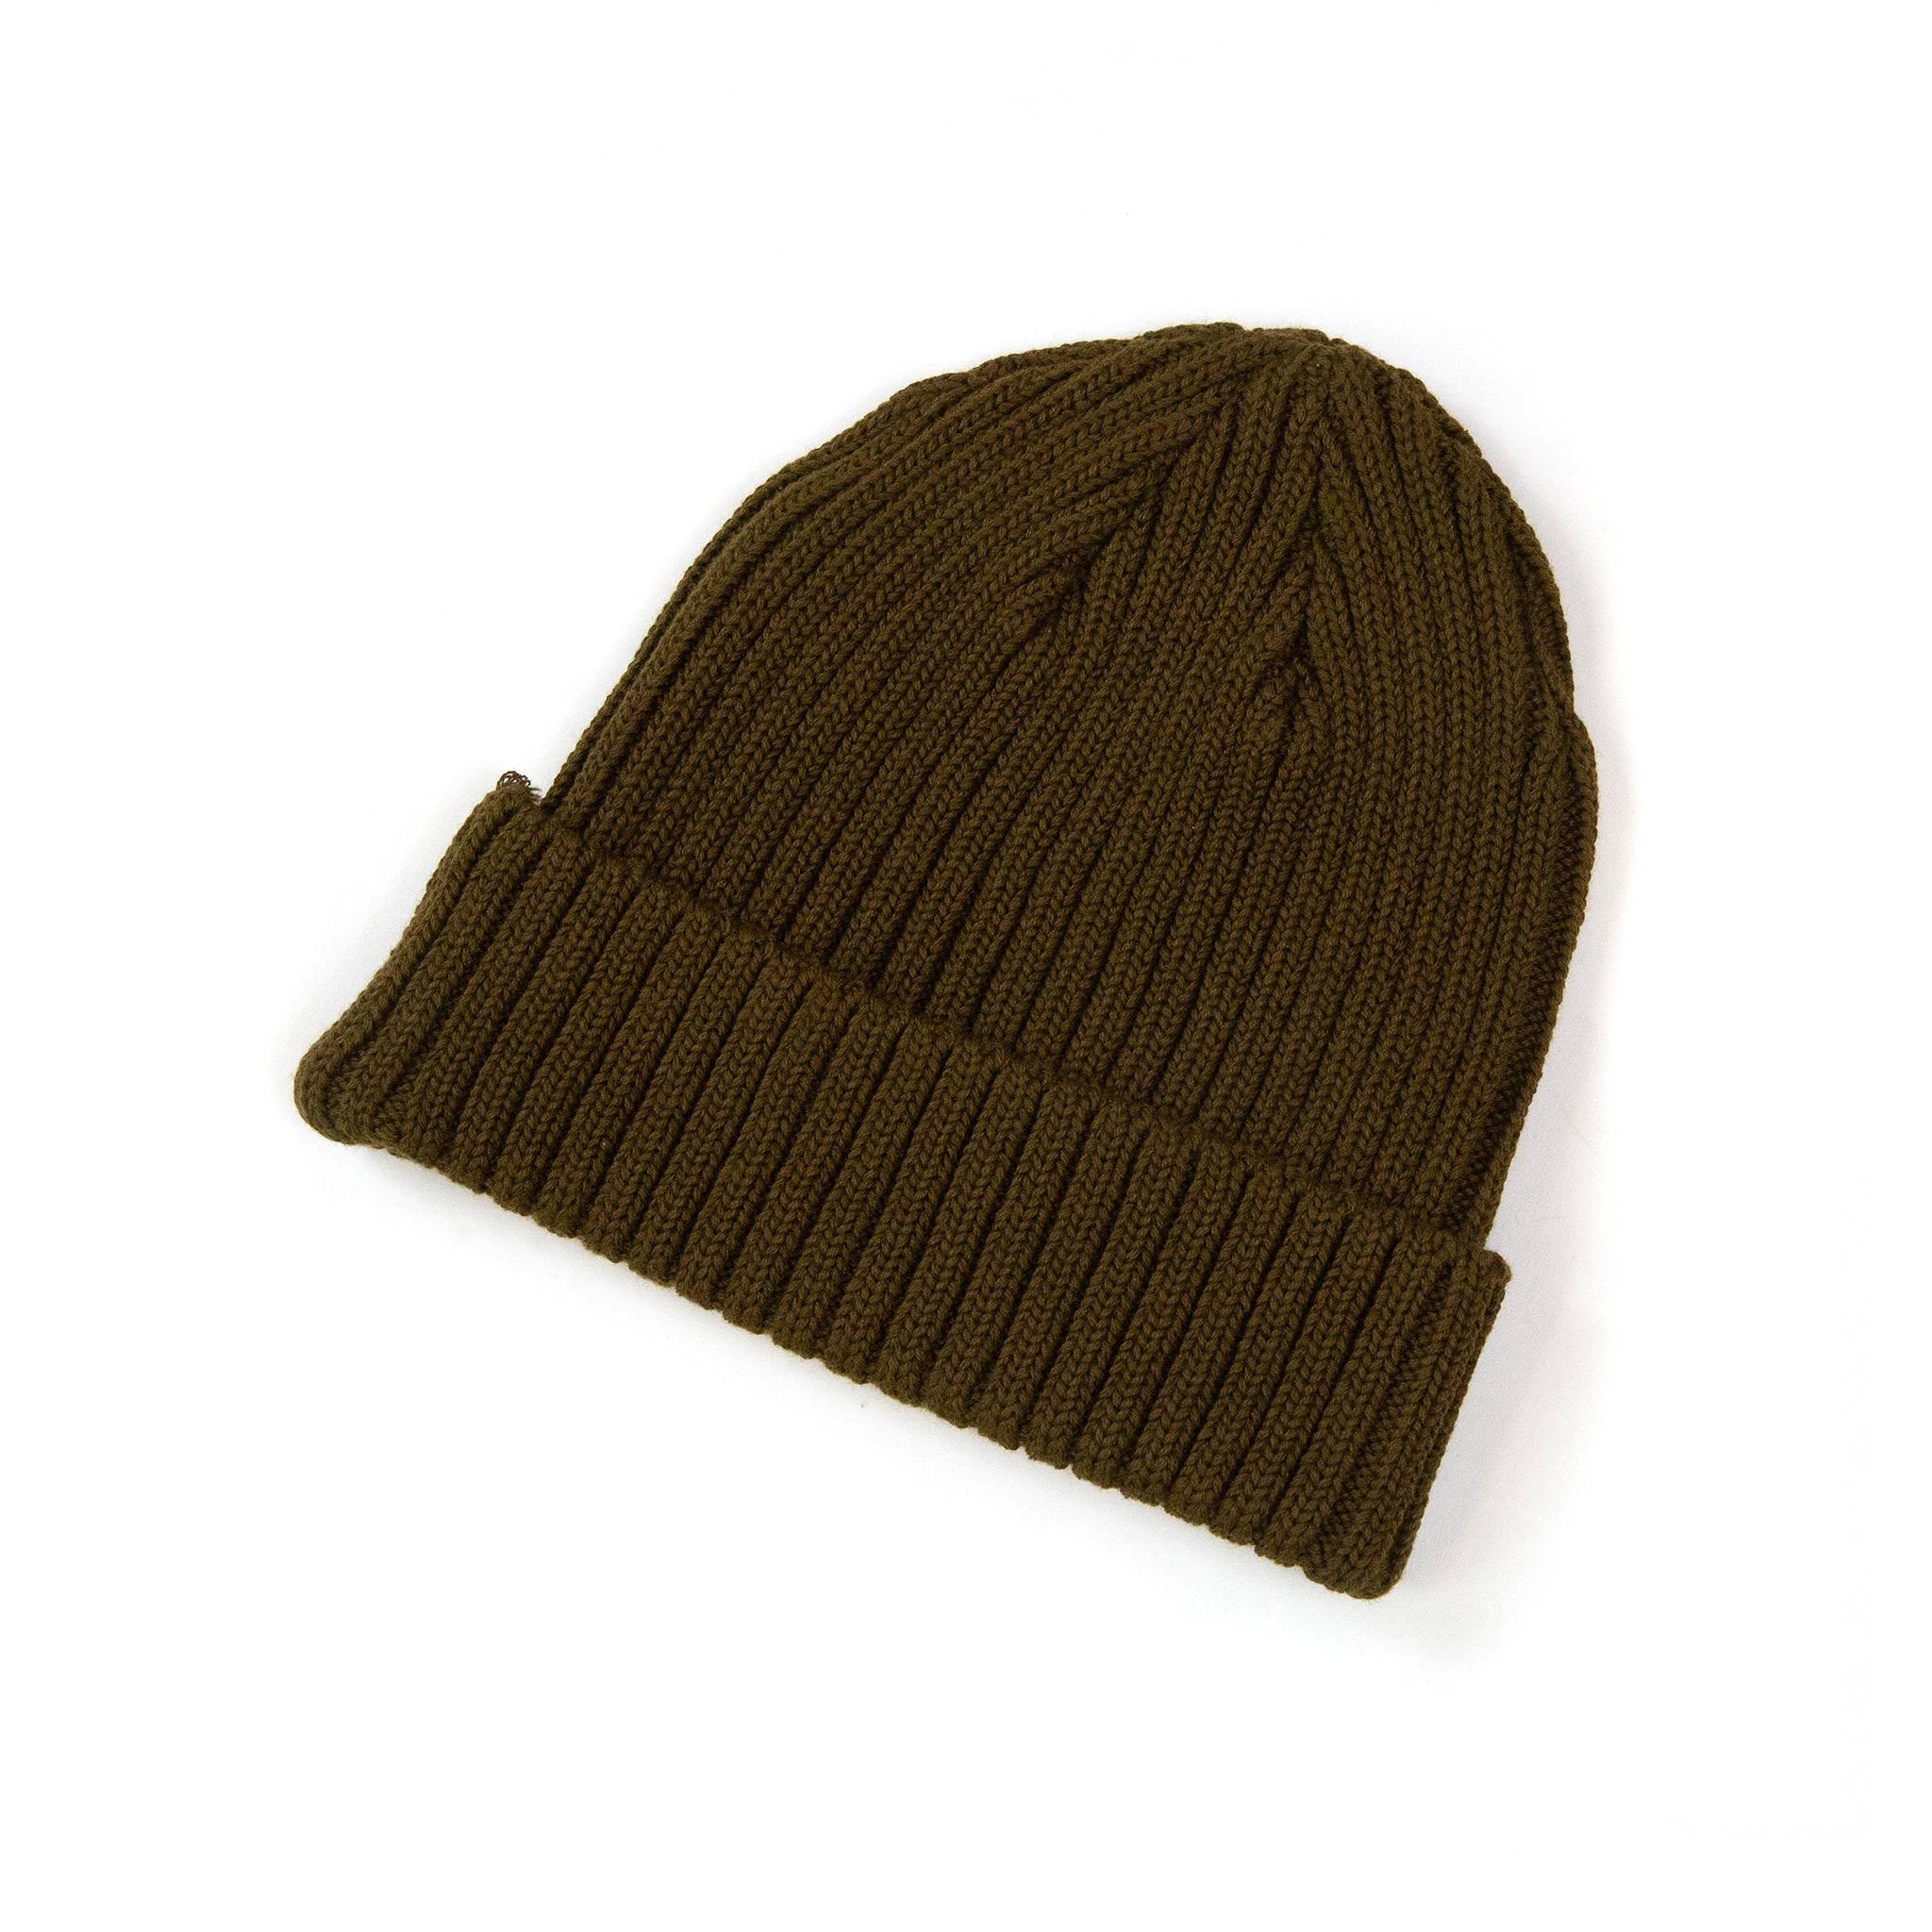 The Real McCoy's MA21014 Cotton Bronson Knit Cap Olive Side